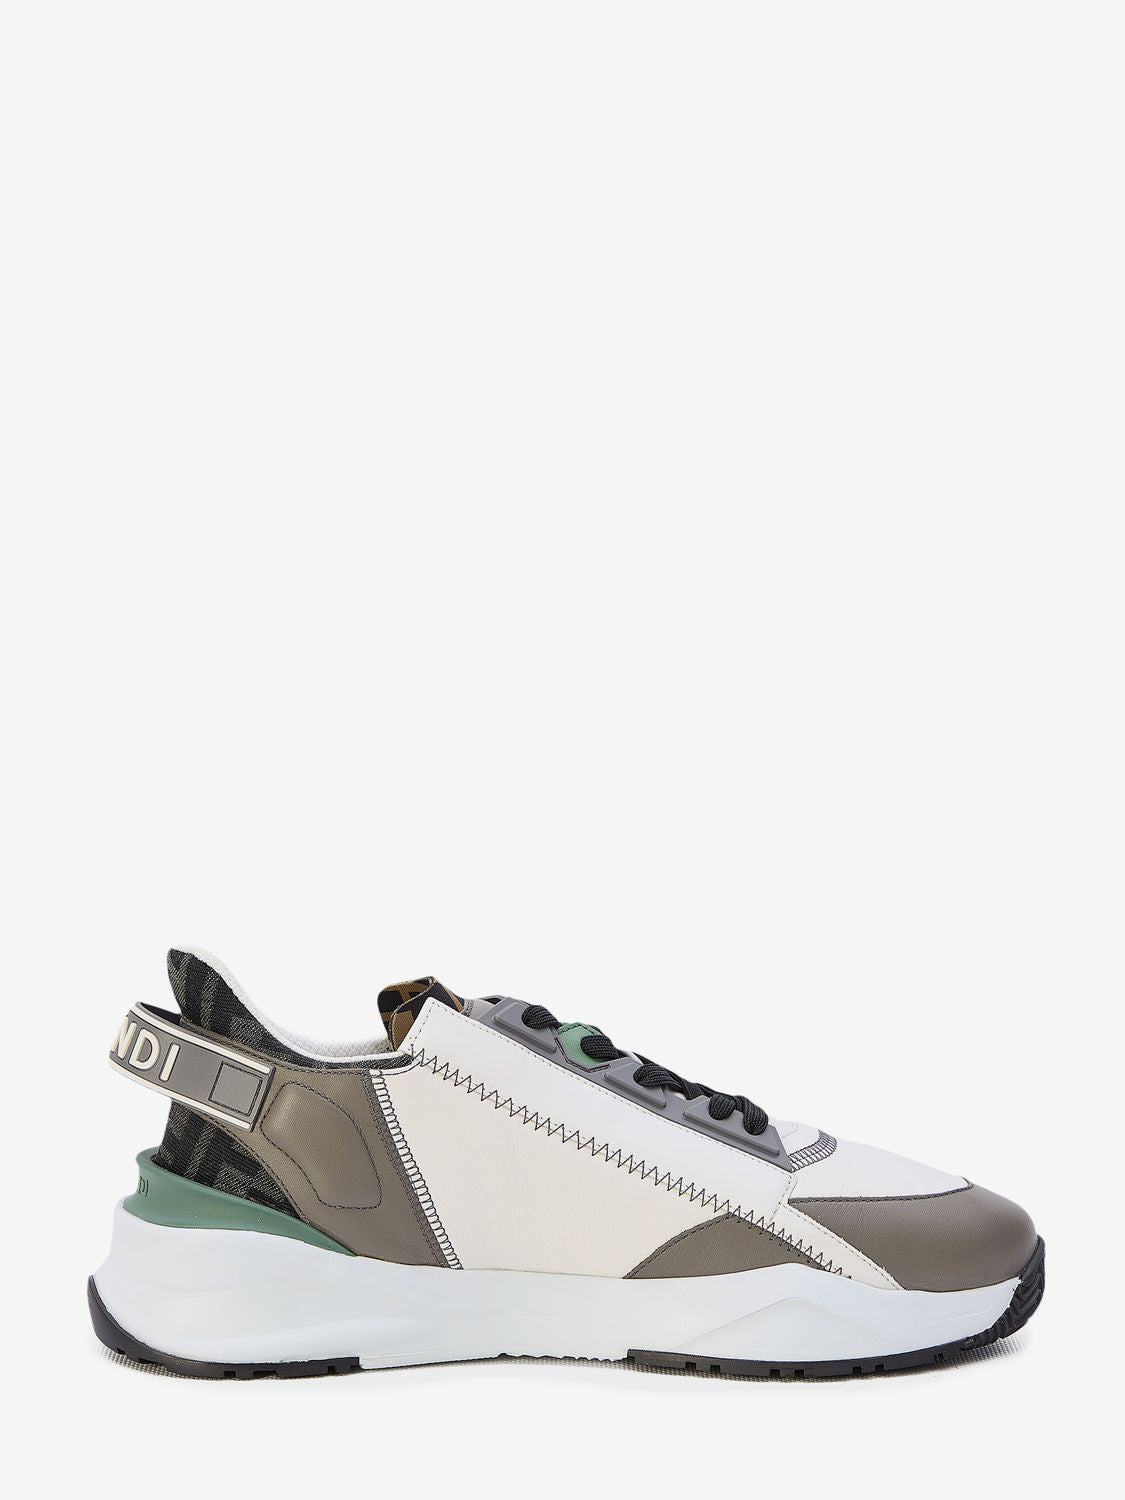 White and Grey Leather Fendi Flow Sneakers for Men